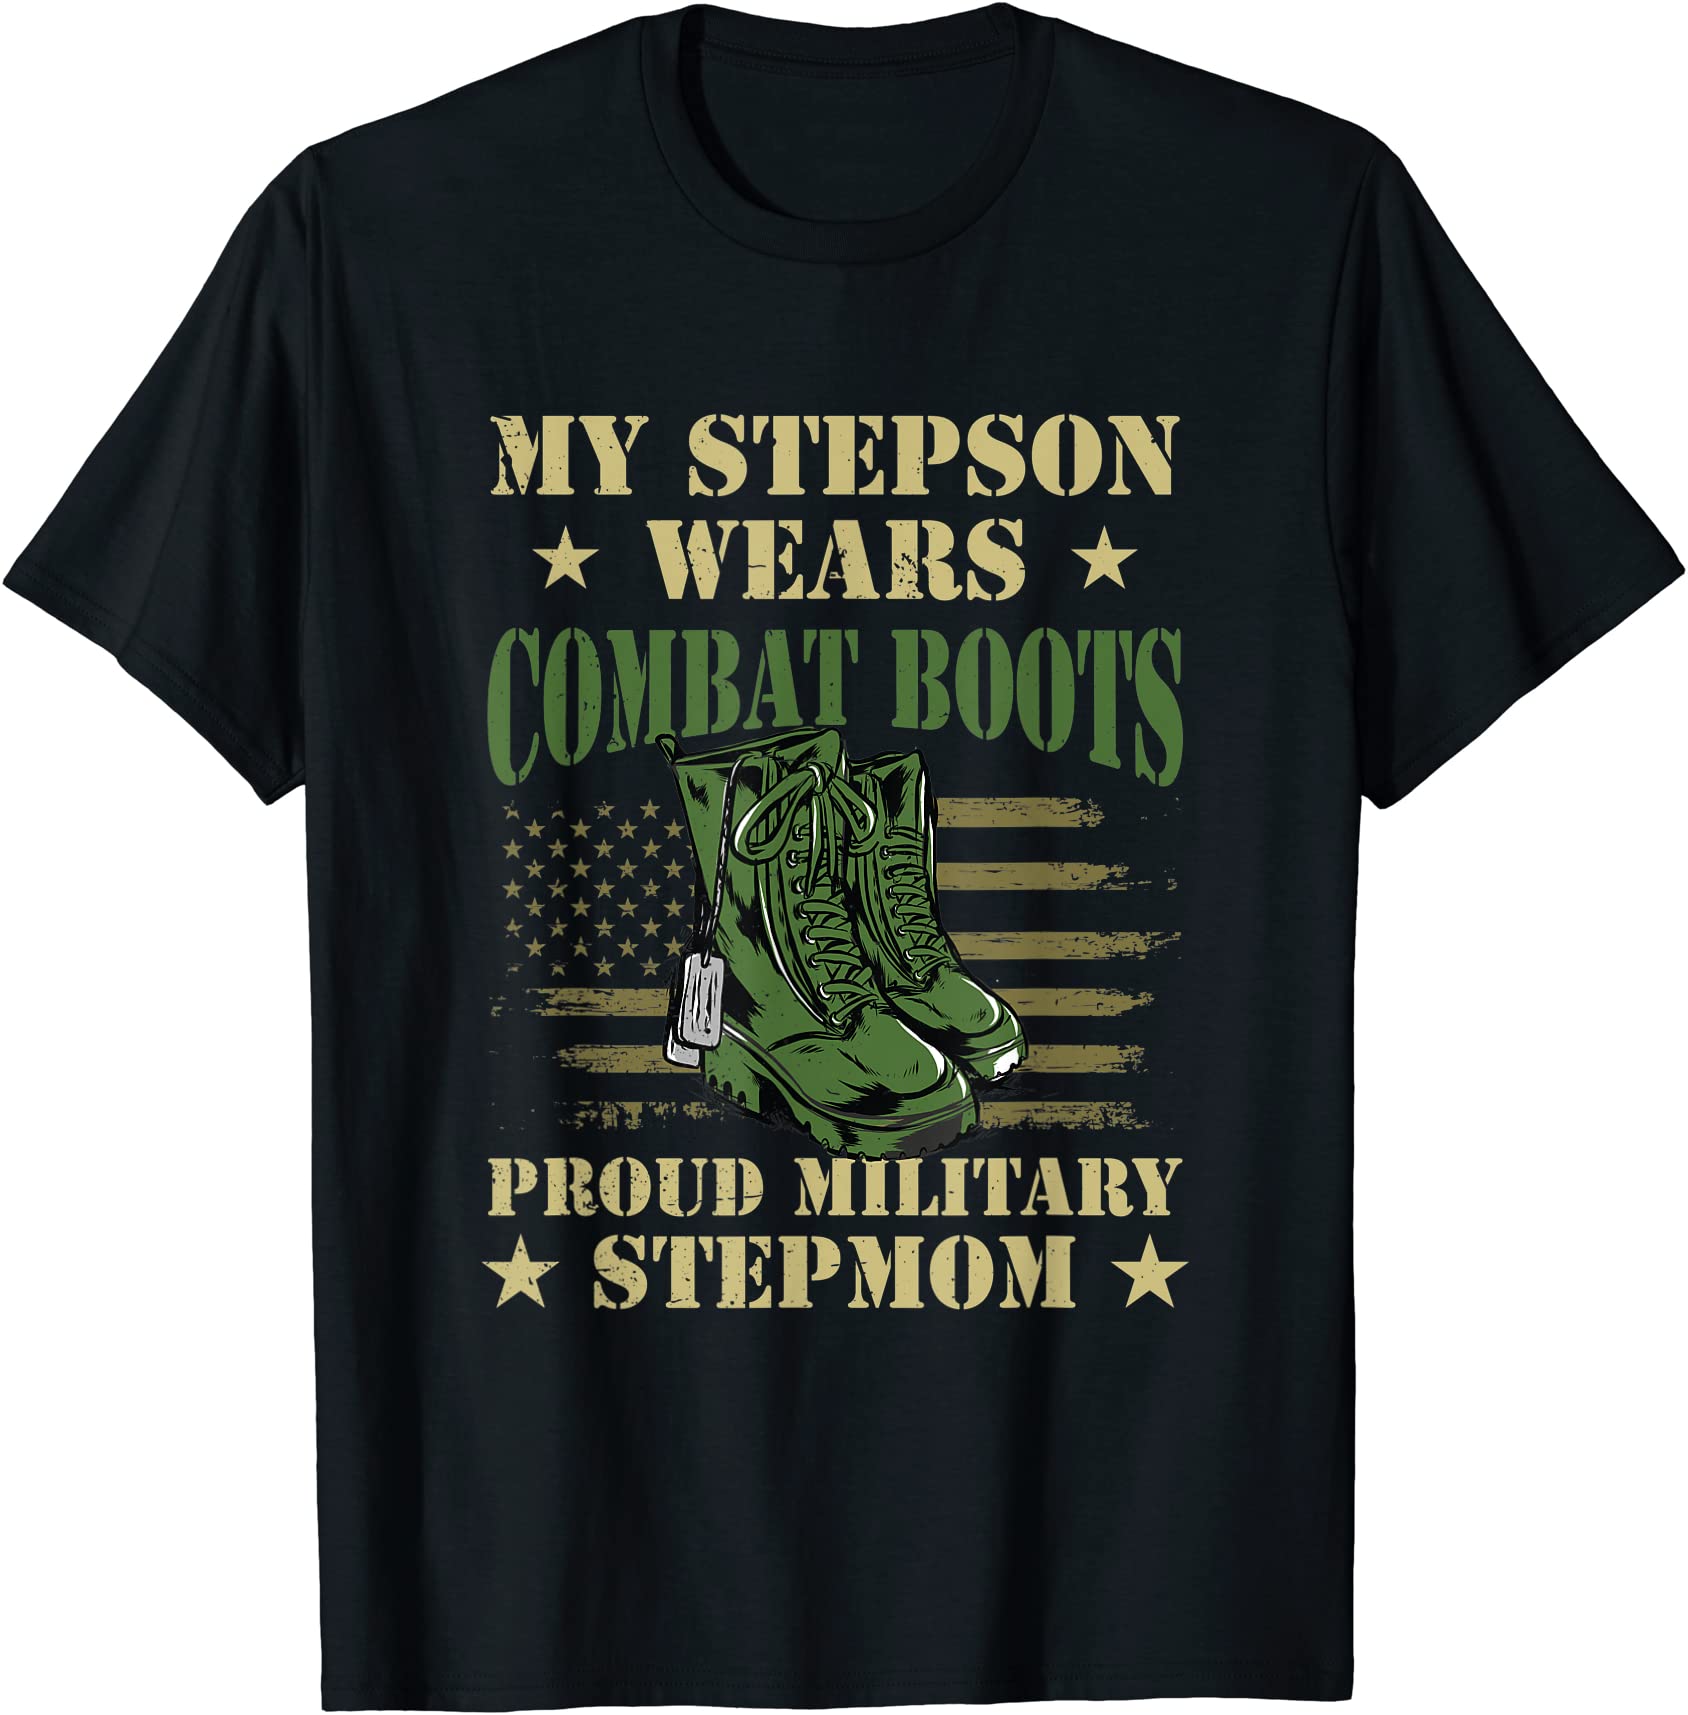 My Stepson Wears Combat Boots Proud Military Step Mom T Shirt Men Buy T Shirt Designs 4154